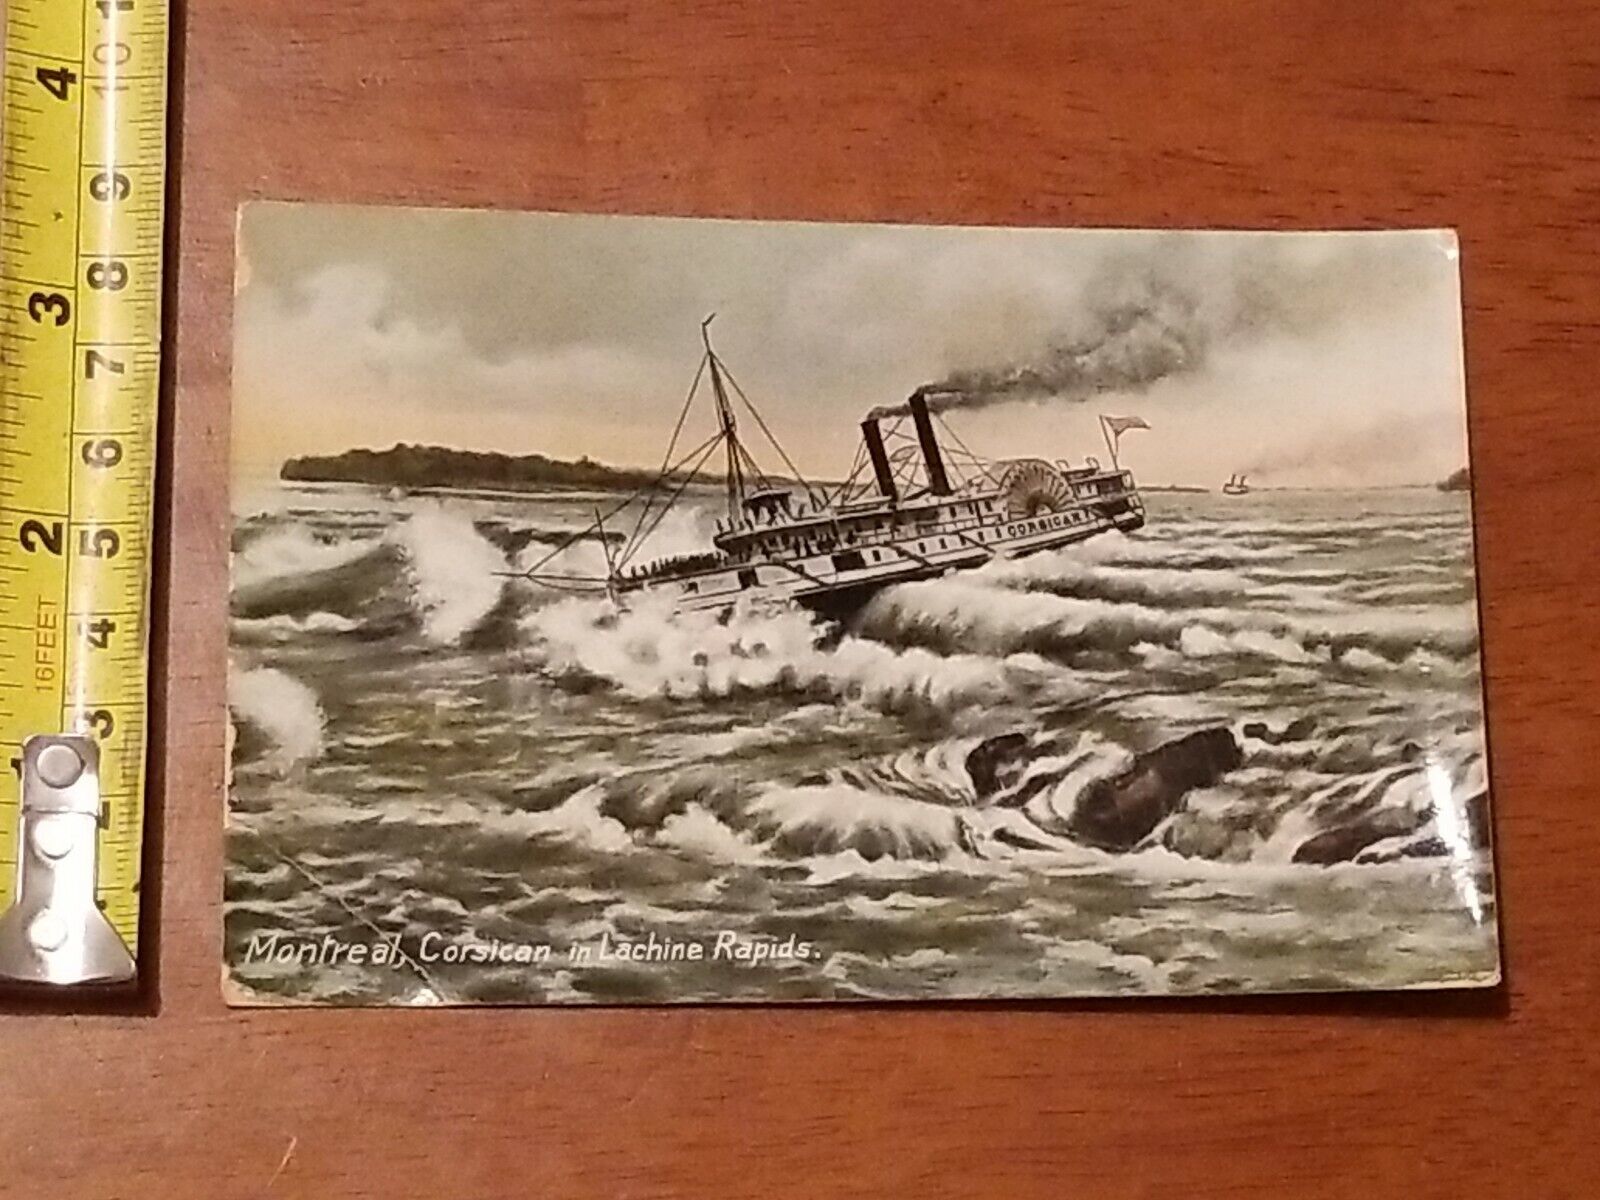 RARE OLD VINTAGE POSTCARD 1907 MONTREAL CORSICAN IN LACHINE RAPIDS